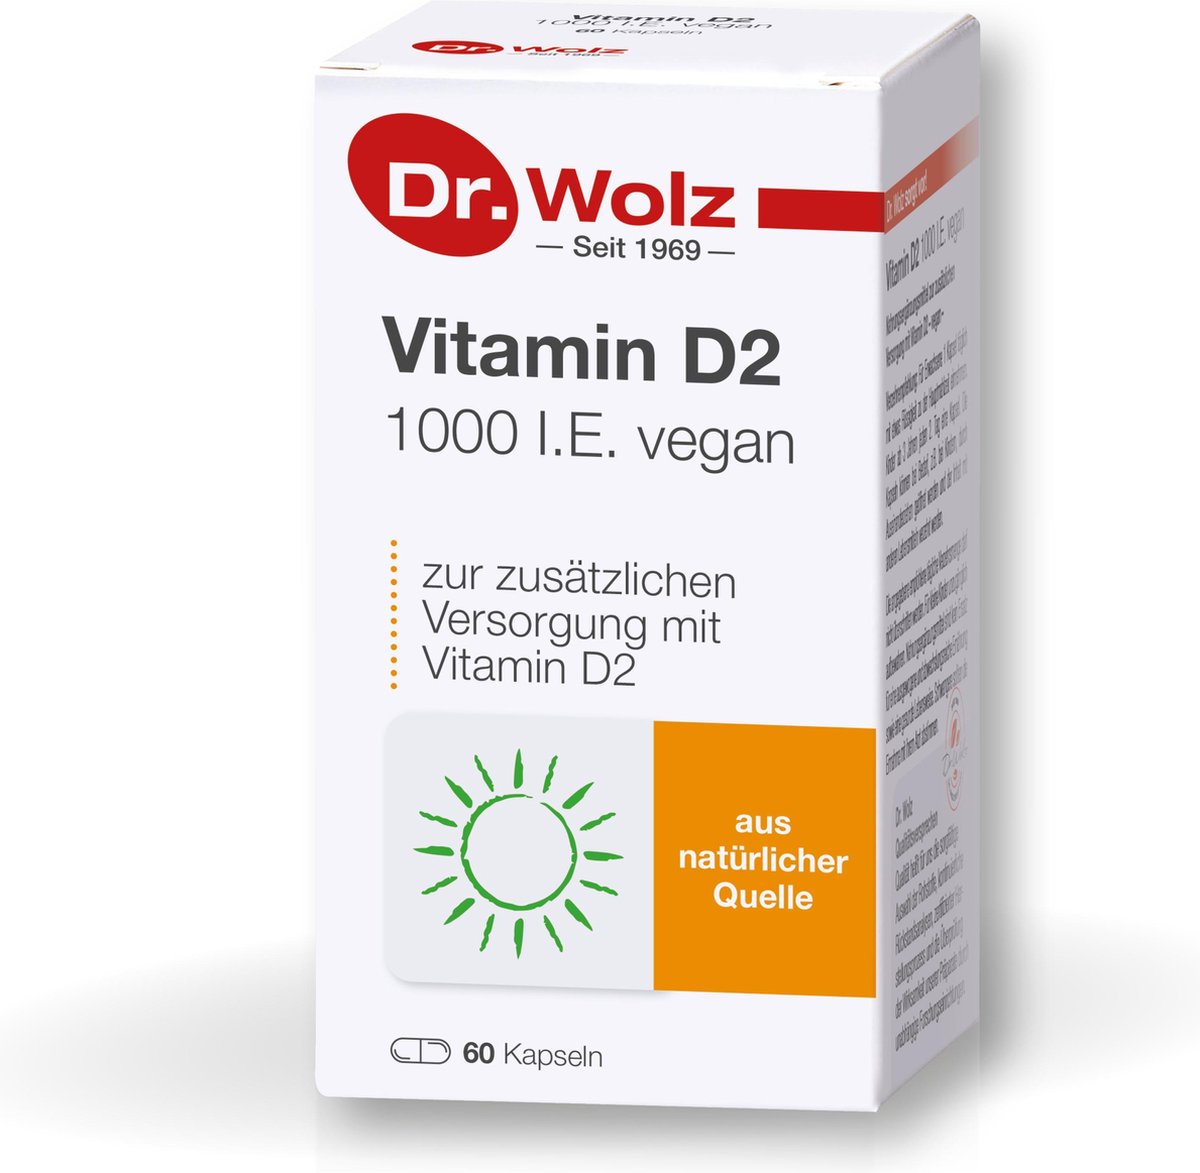 Dr. Wolz Vitamine D2 - Dr. Wolz